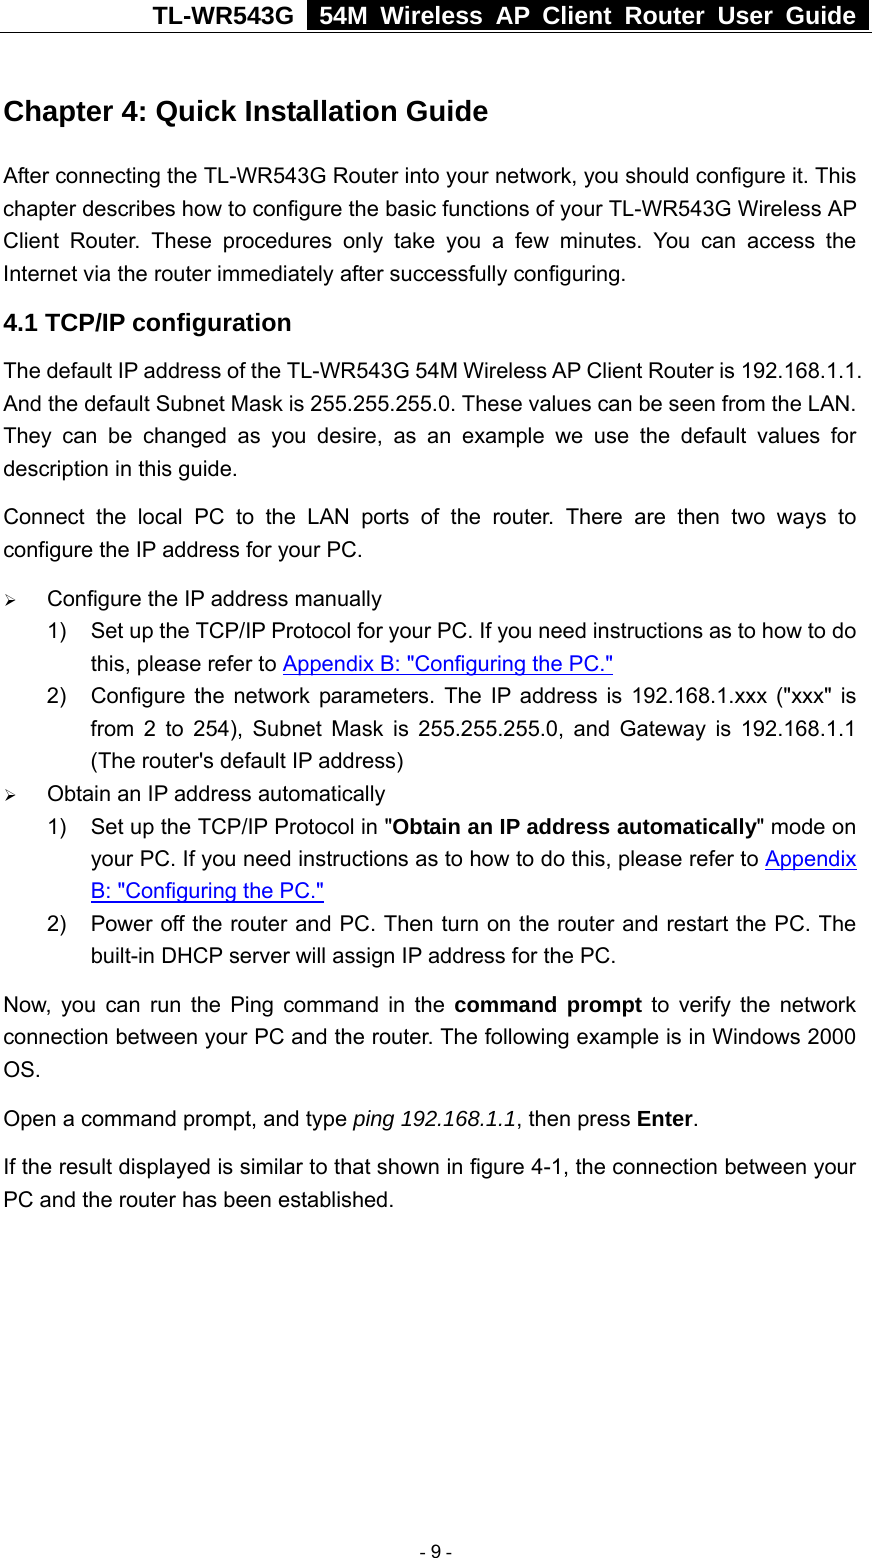 TL-WR543G   54M Wireless AP Client Router User Guide  Chapter 4: Quick Installation Guide After connecting the TL-WR543G Router into your network, you should configure it. This chapter describes how to configure the basic functions of your TL-WR543G Wireless AP Client Router. These procedures only take you a few minutes. You can access the Internet via the router immediately after successfully configuring. 4.1 TCP/IP configuration The default IP address of the TL-WR543G 54M Wireless AP Client Router is 192.168.1.1. And the default Subnet Mask is 255.255.255.0. These values can be seen from the LAN. They can be changed as you desire, as an example we use the default values for description in this guide. Connect the local PC to the LAN ports of the router. There are then two ways to configure the IP address for your PC. ¾ Configure the IP address manually 1)  Set up the TCP/IP Protocol for your PC. If you need instructions as to how to do this, please refer to Appendix B: &quot;Configuring the PC.&quot; 2)  Configure the network parameters. The IP address is 192.168.1.xxx (&quot;xxx&quot; is from 2 to 254), Subnet Mask is 255.255.255.0, and Gateway is 192.168.1.1 (The router&apos;s default IP address) ¾ Obtain an IP address automatically 1)  Set up the TCP/IP Protocol in &quot;Obtain an IP address automatically&quot; mode on your PC. If you need instructions as to how to do this, please refer to Appendix B: &quot;Configuring the PC.&quot; 2)  Power off the router and PC. Then turn on the router and restart the PC. The built-in DHCP server will assign IP address for the PC. Now, you can run the Ping command in the command prompt to verify the network connection between your PC and the router. The following example is in Windows 2000 OS. Open a command prompt, and type ping 192.168.1.1, then press Enter.          If the result displayed is similar to that shown in figure 4-1, the connection between your PC and the router has been established.    - 9 - 